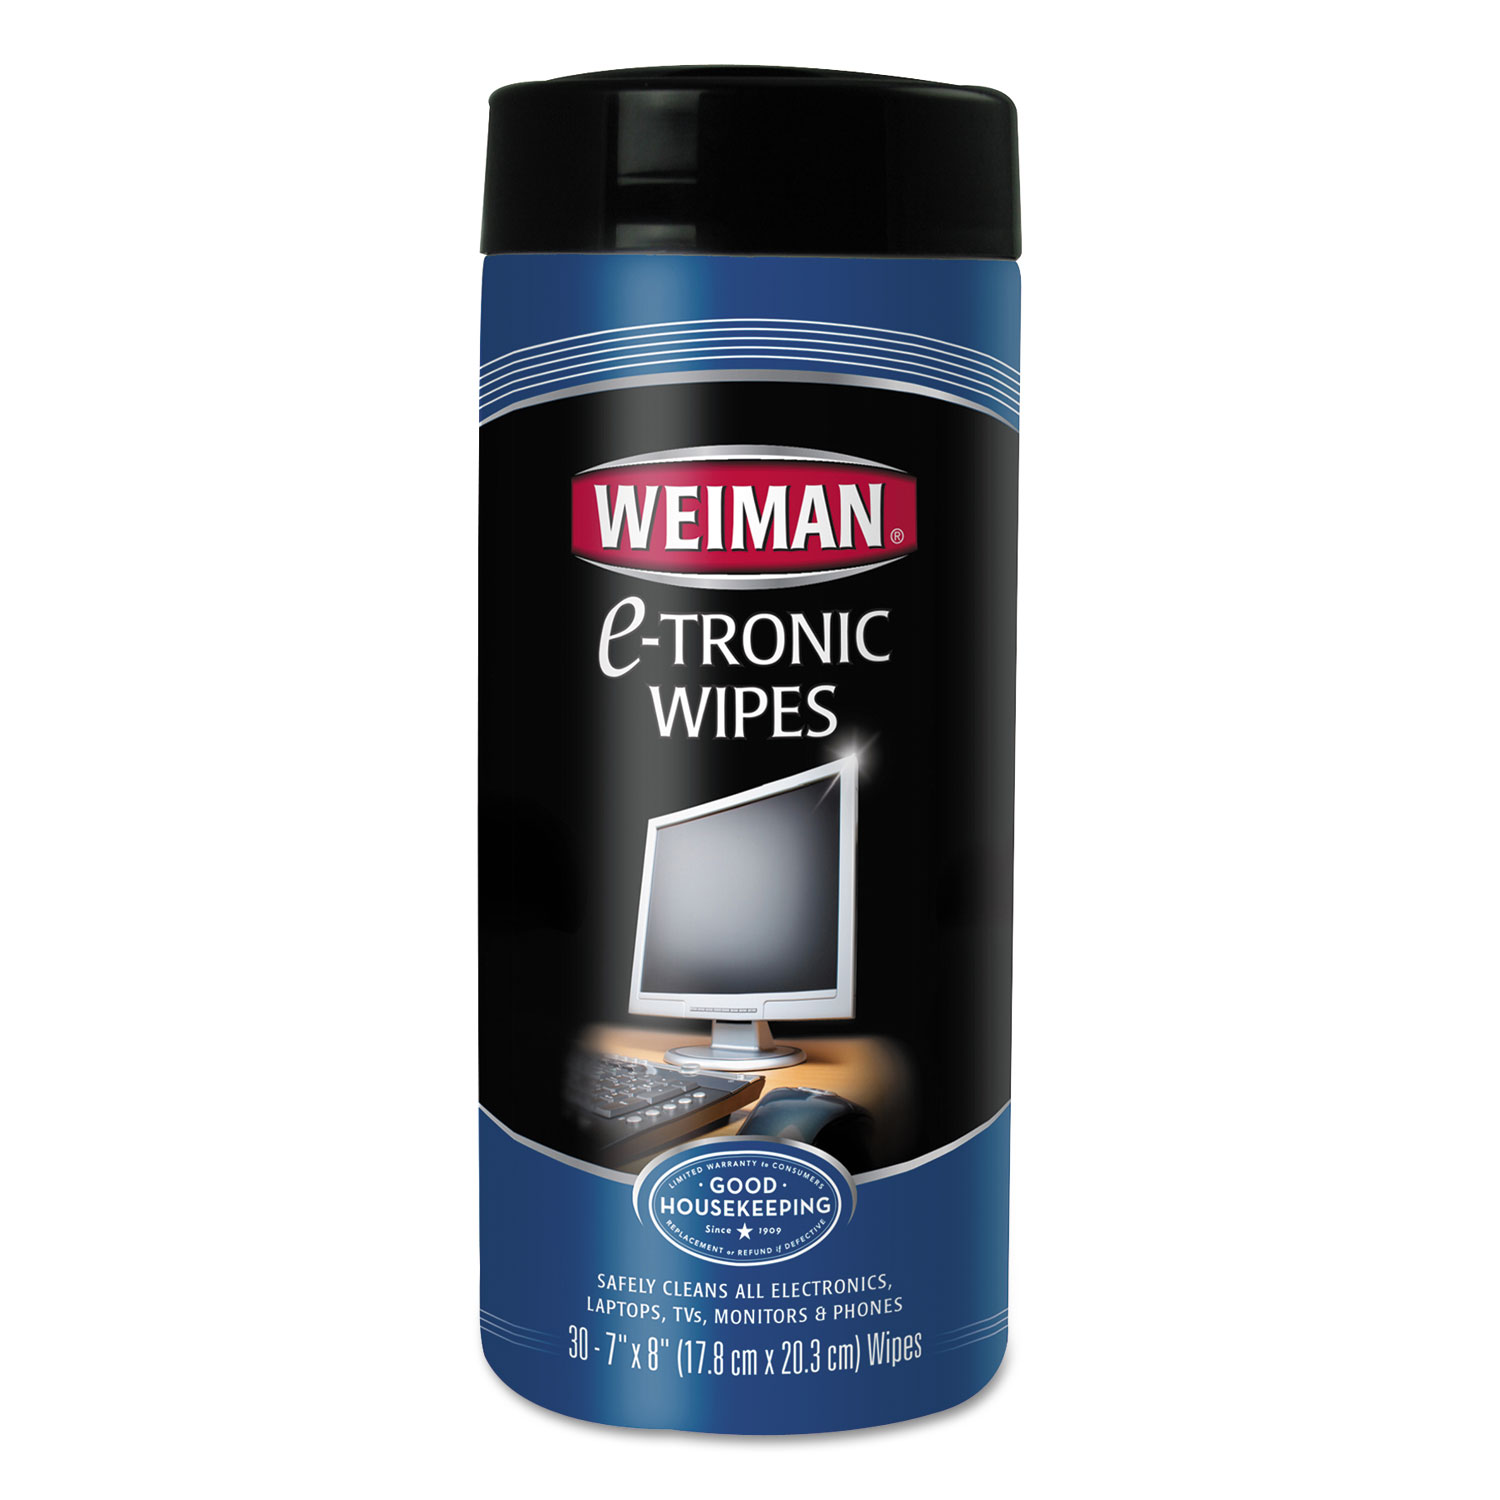  WEIMAN 93CT E-tronic Wipes, 8 x 7, White, 30/Canister, 4/Carton (WMN93CT) 